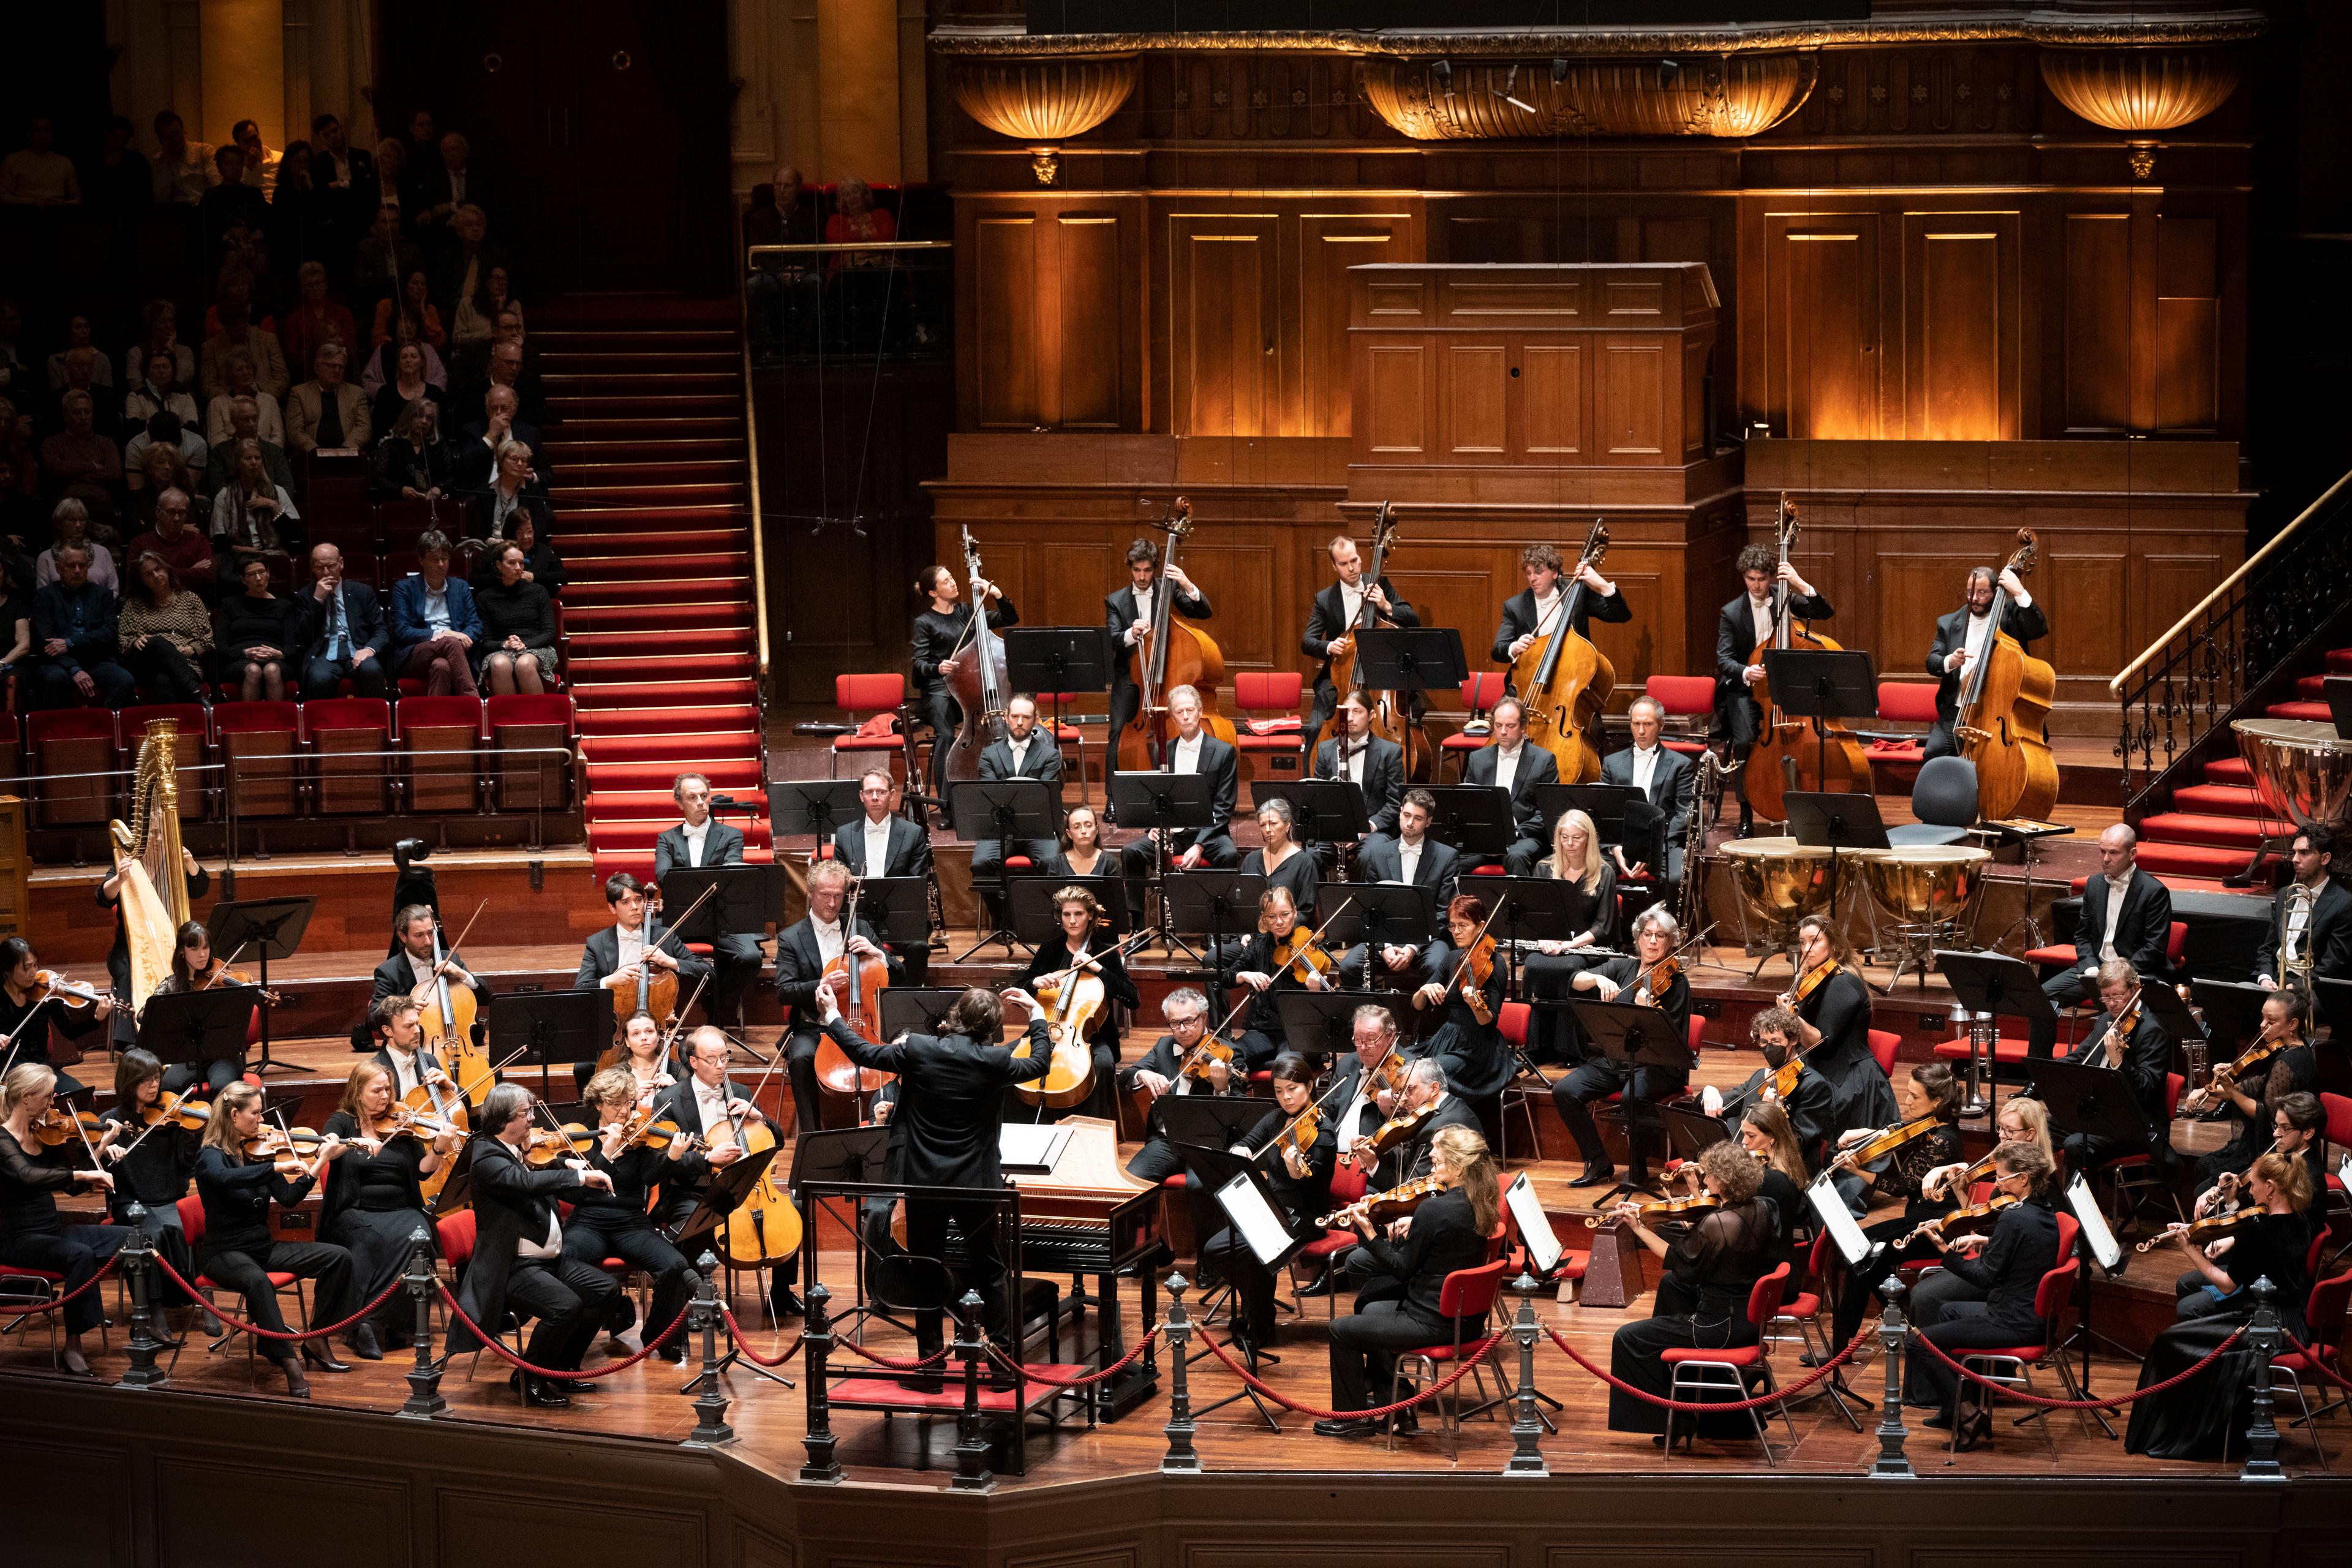 Royal Concertgebouw Orchestra playing on stage